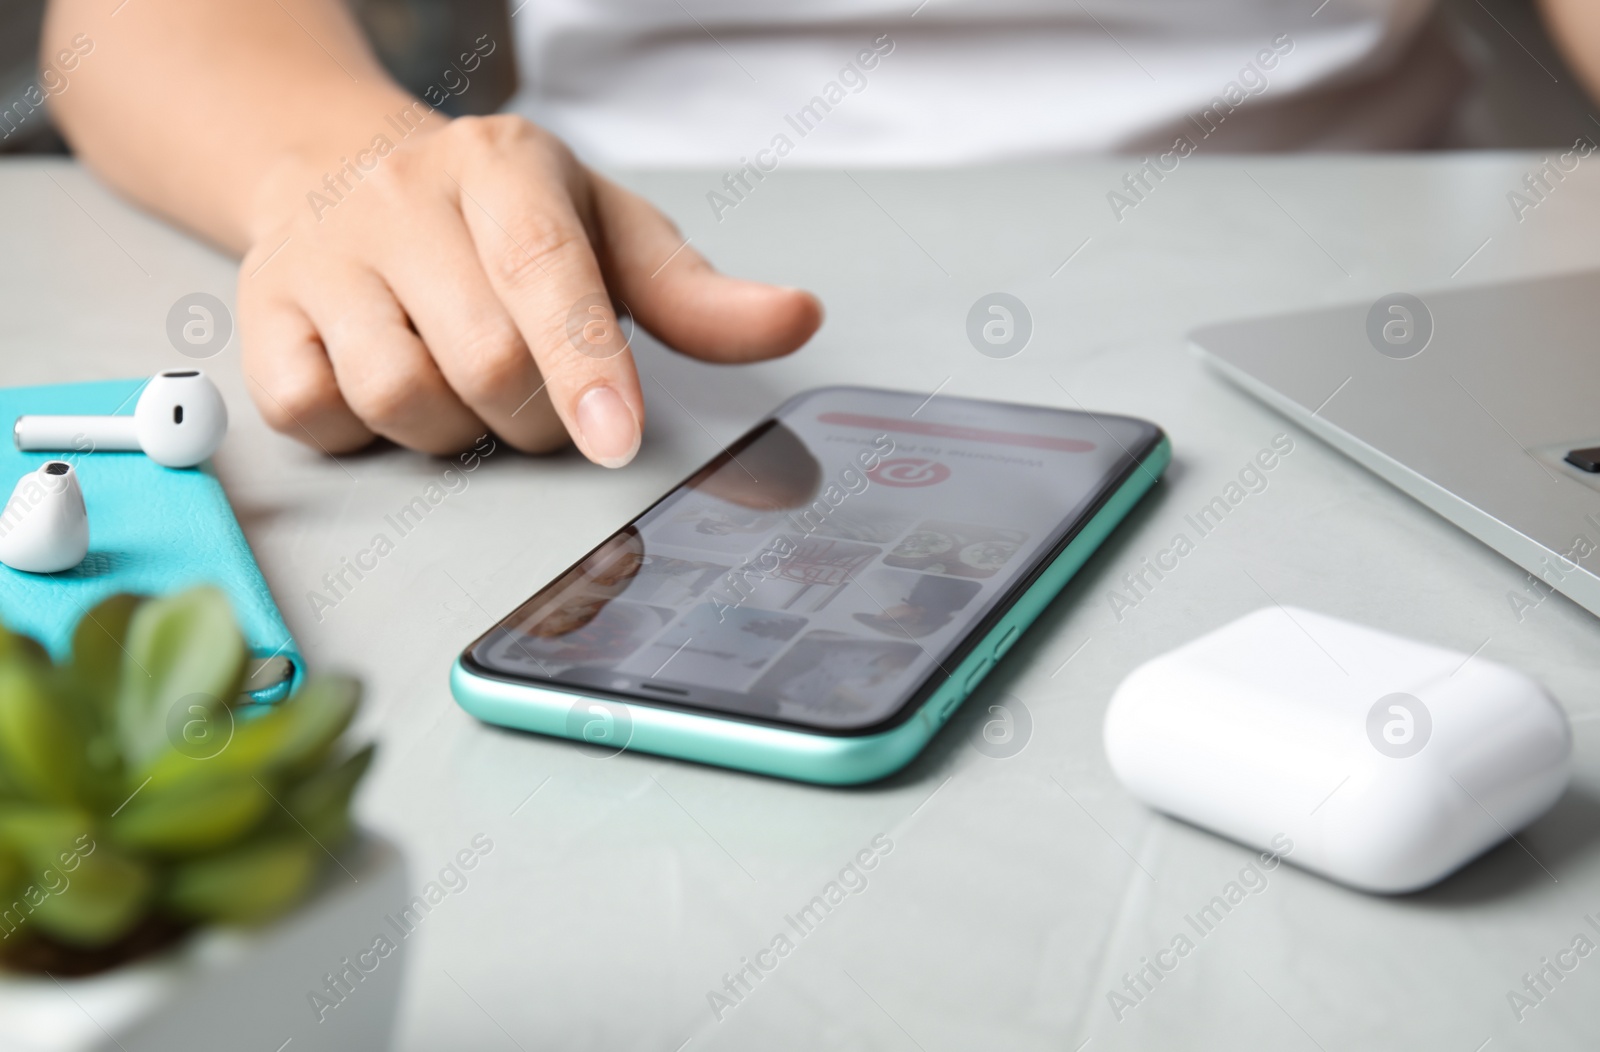 Photo of MYKOLAIV, UKRAINE - JULY 10, 2020: Woman using with Pinterest app on Iphone 11 at table, closeup